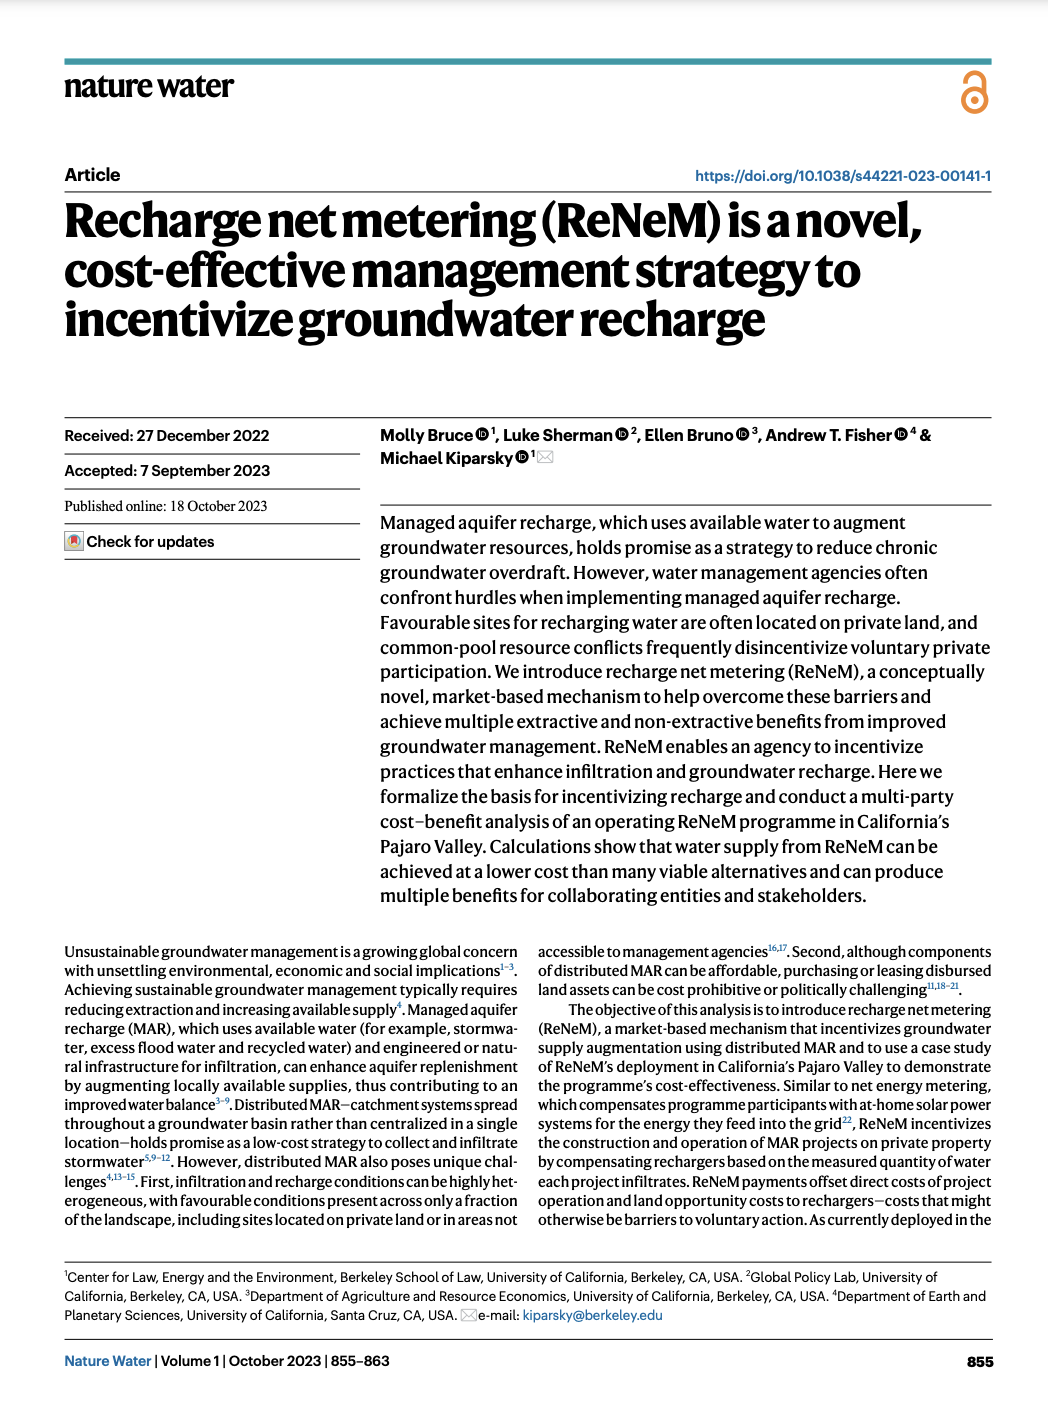 First page of publication titled, 'Recharge net metering (ReNeM) is a novel, cost-effective management strategy to incentivize groundwater recharge.' Full publication PDF linked below.